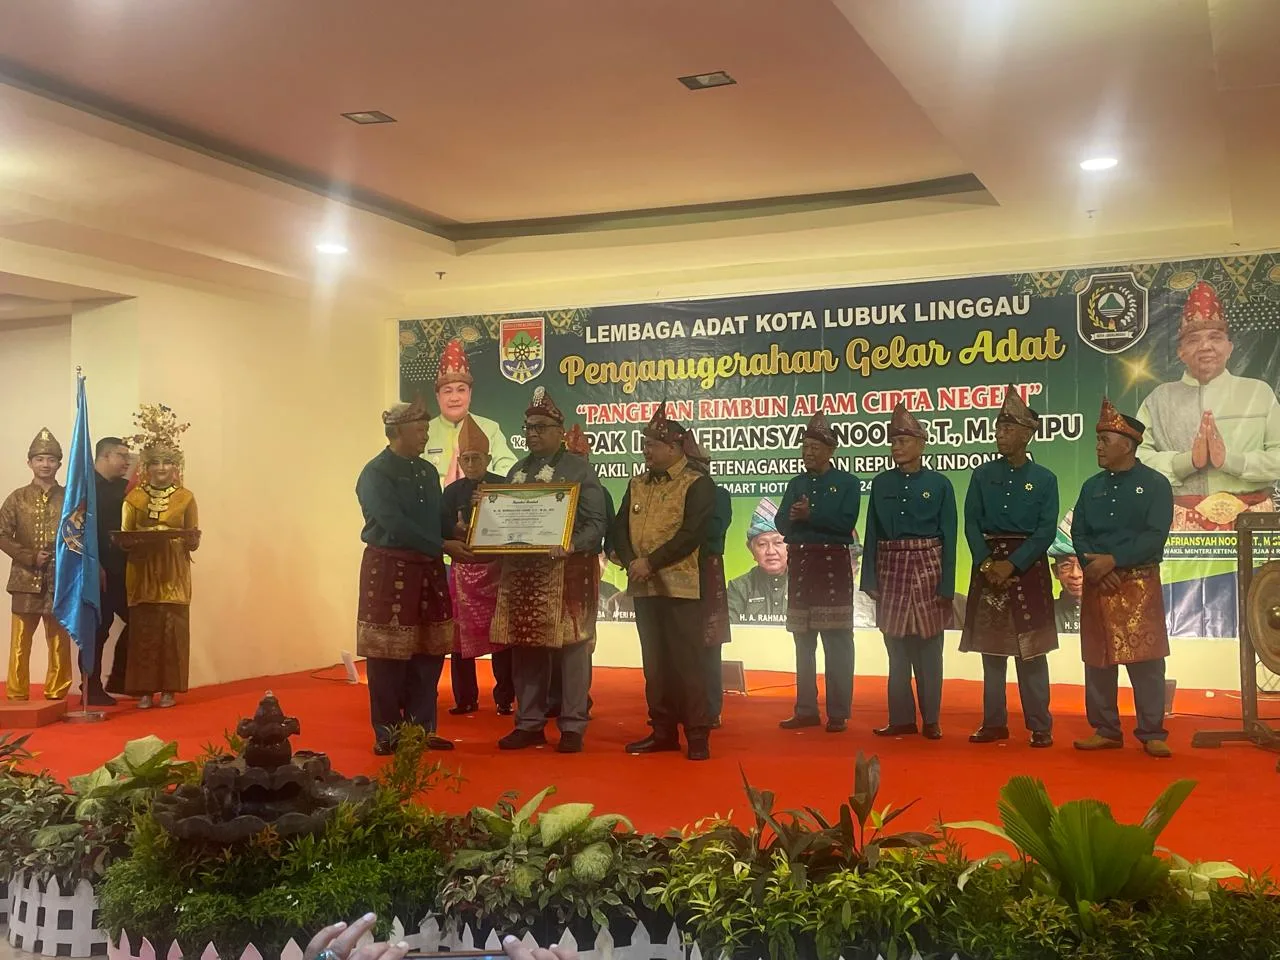 The Deputy Minister of Manpower of the Republic of Indonesia was awarded the traditional title “Prince of Lush Nature and Creation of the Country” by the Lubuklinggau City Traditional Institute